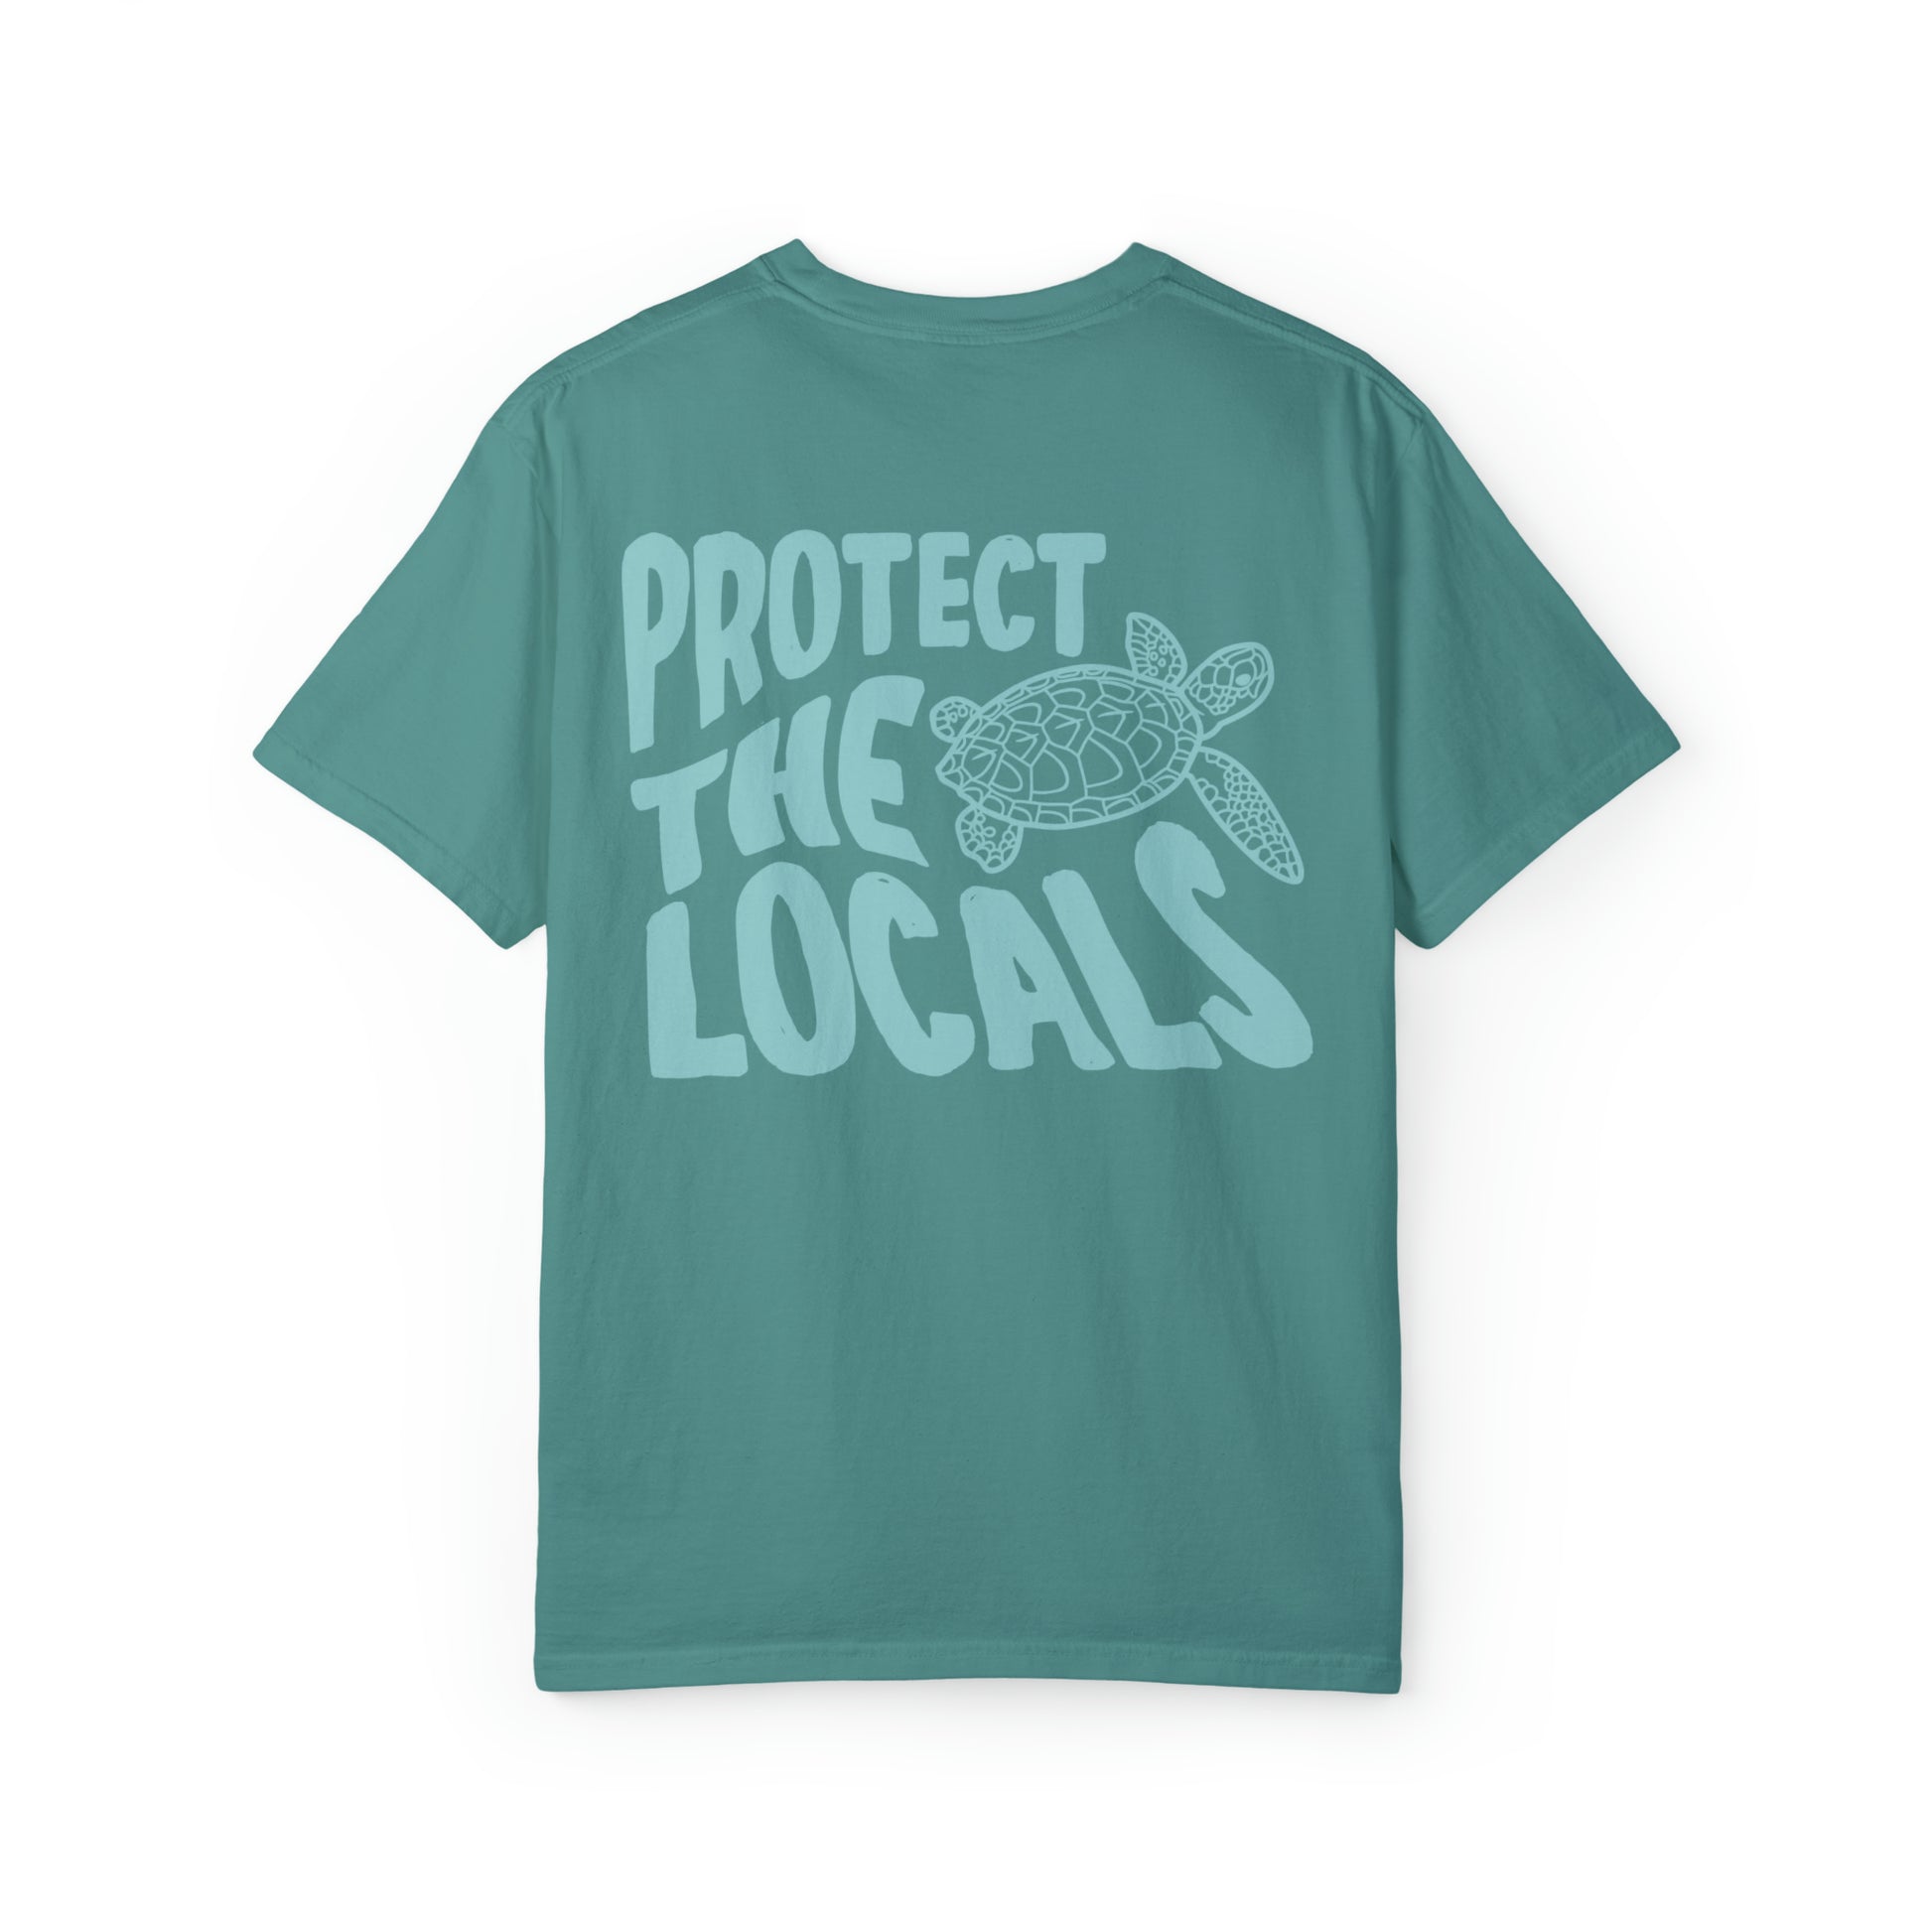 COMFORT COLORS Protect The Locals Sea Turtle Shirt - Fractalista Designs